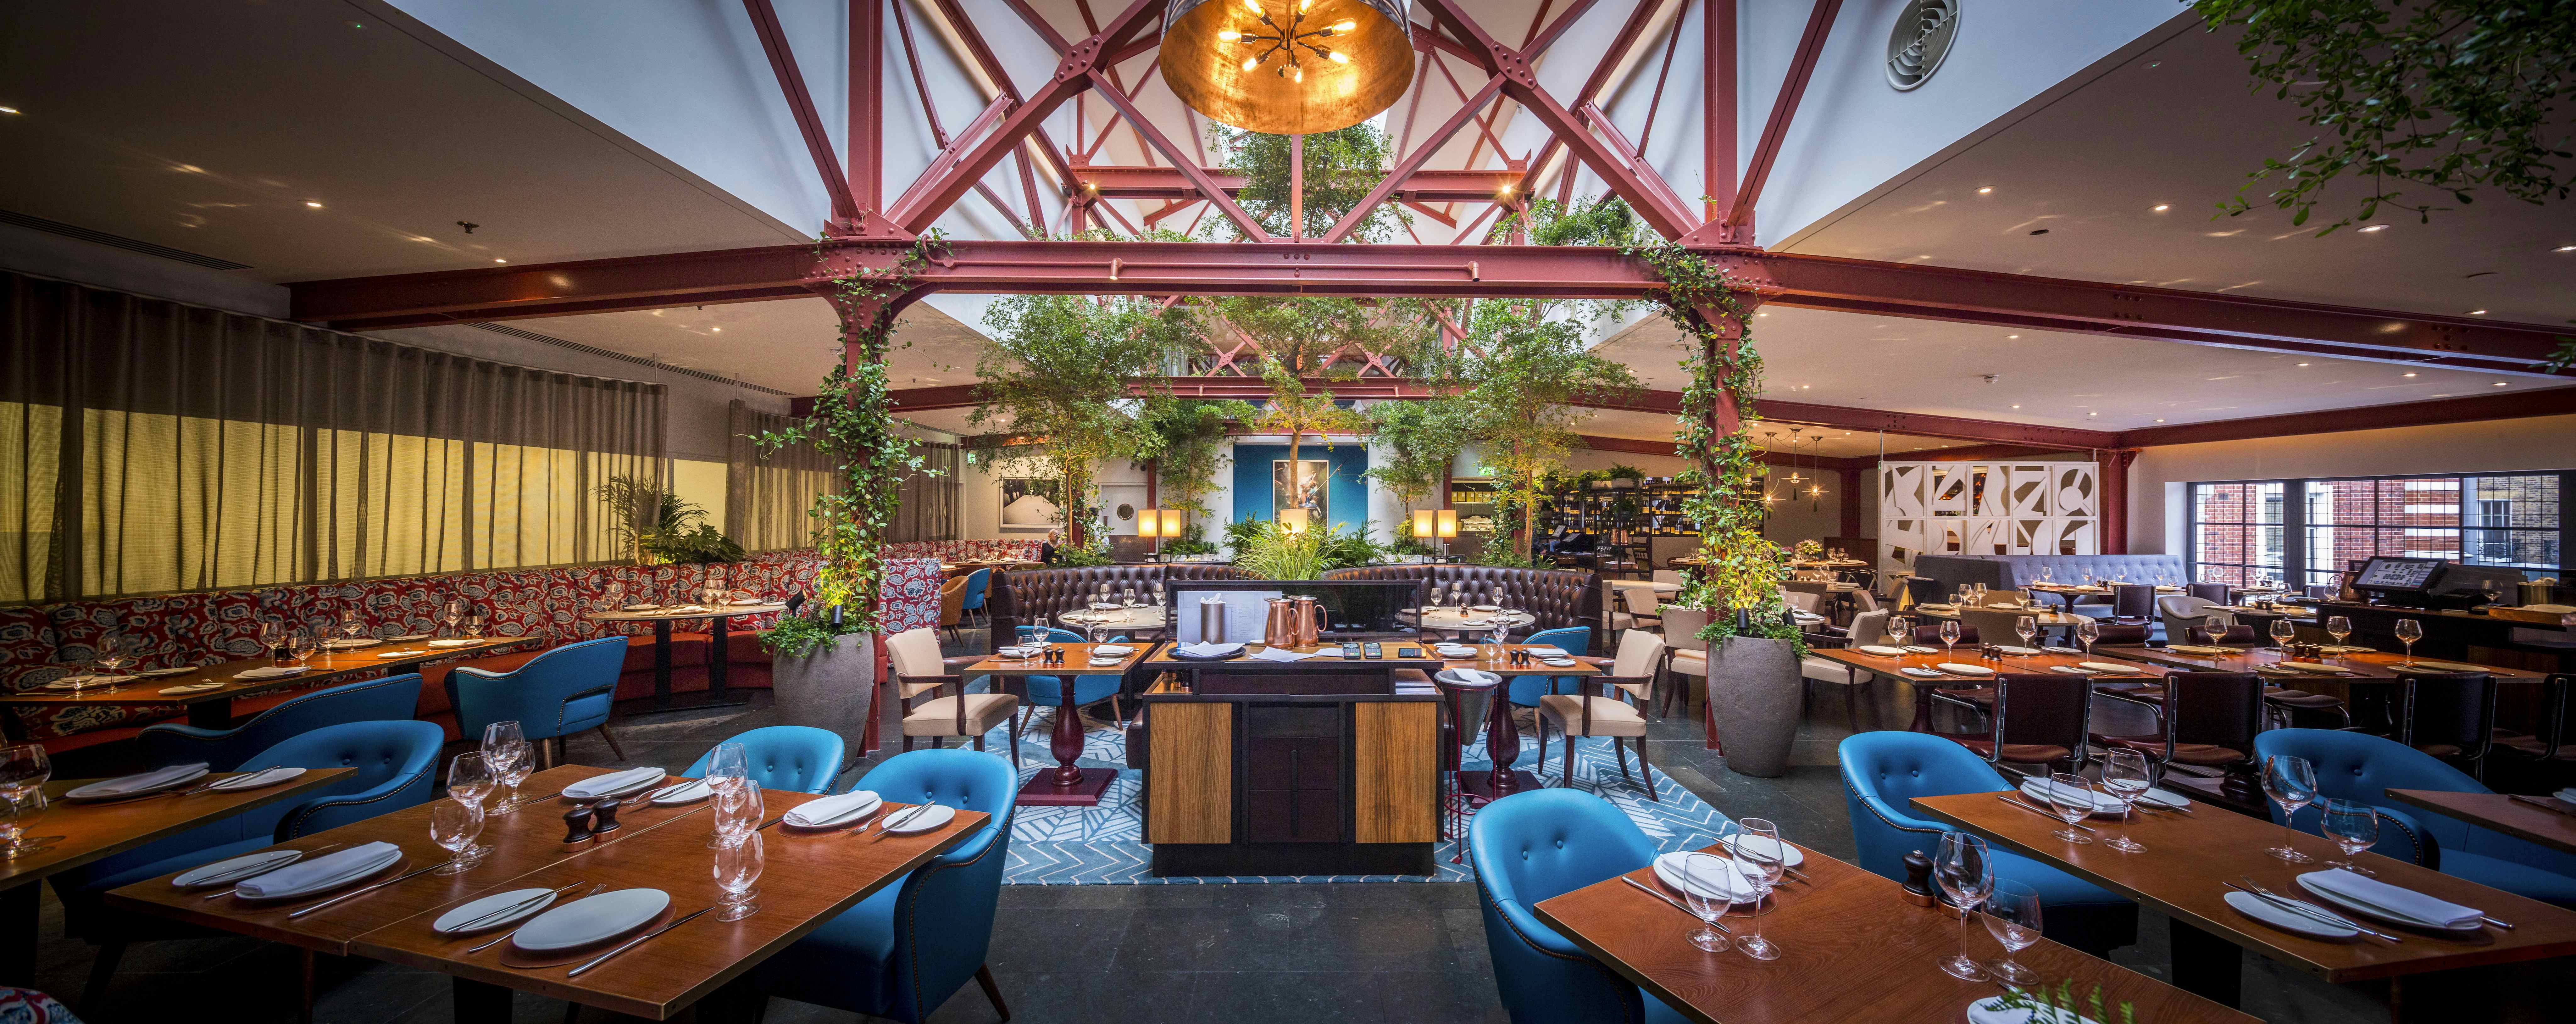 Restaurant and Bar Exclusive Hire, Bluebird Chelsea